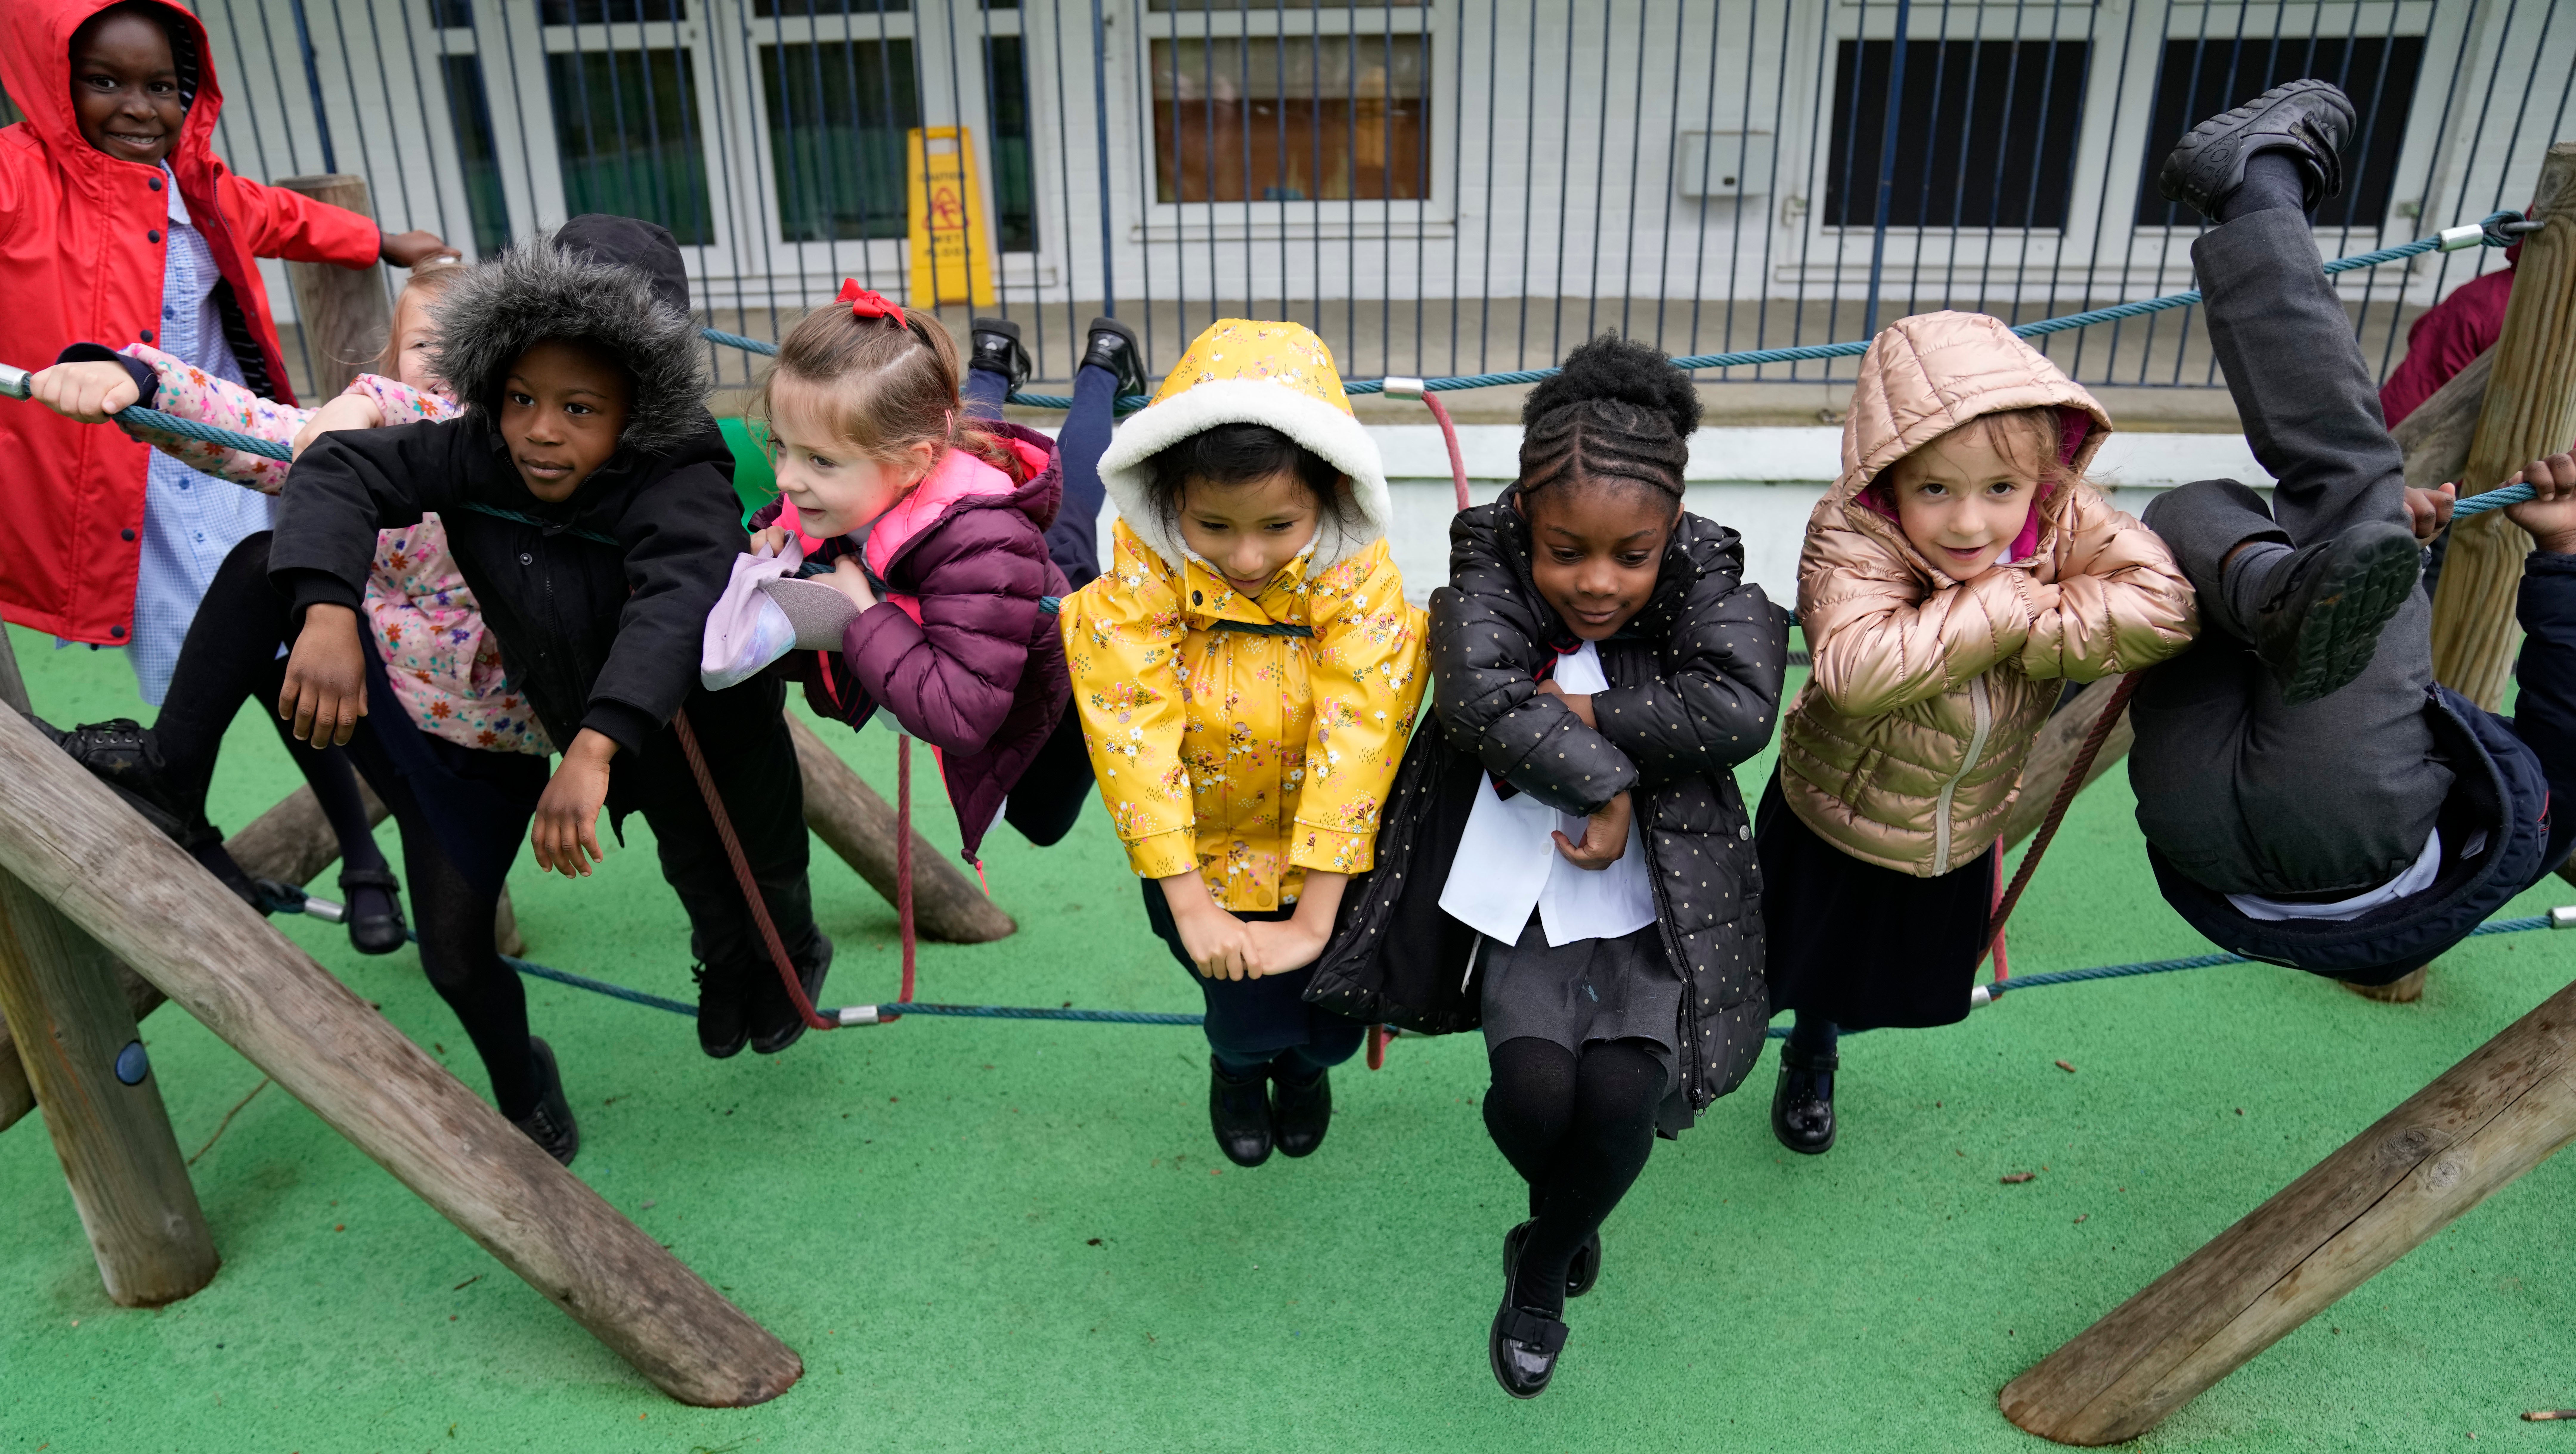 London Beyond The Pandemic-One School's Story